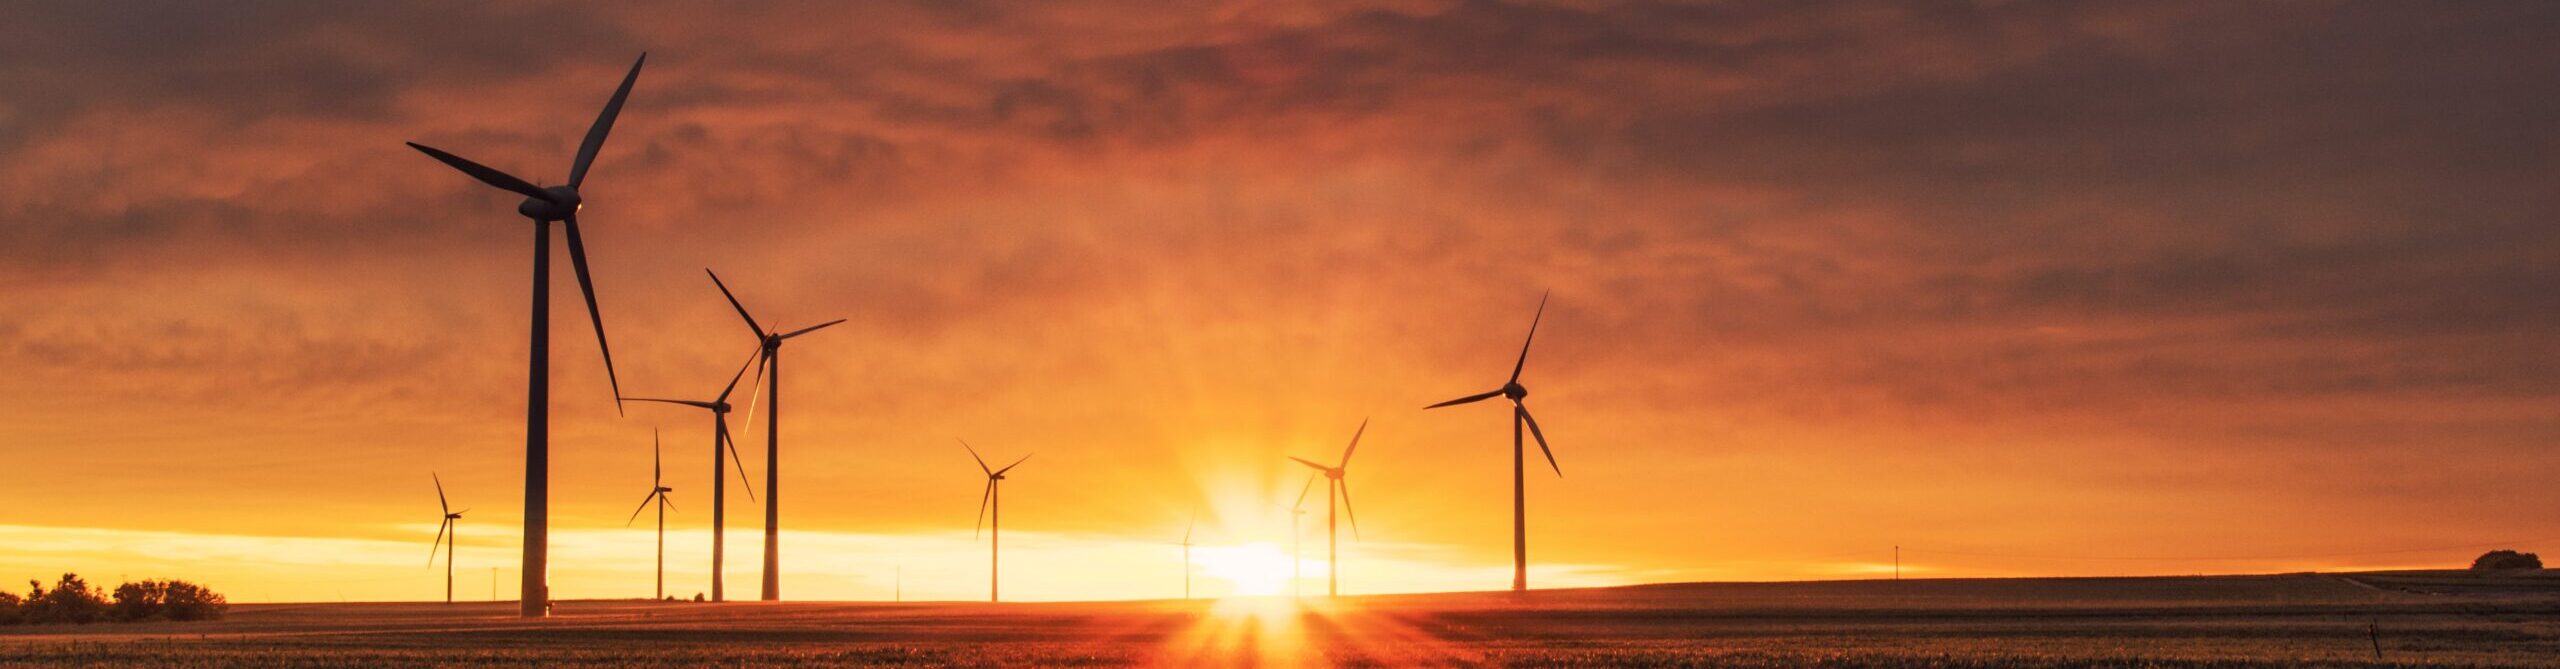 Sunset behind a field of wind turbines